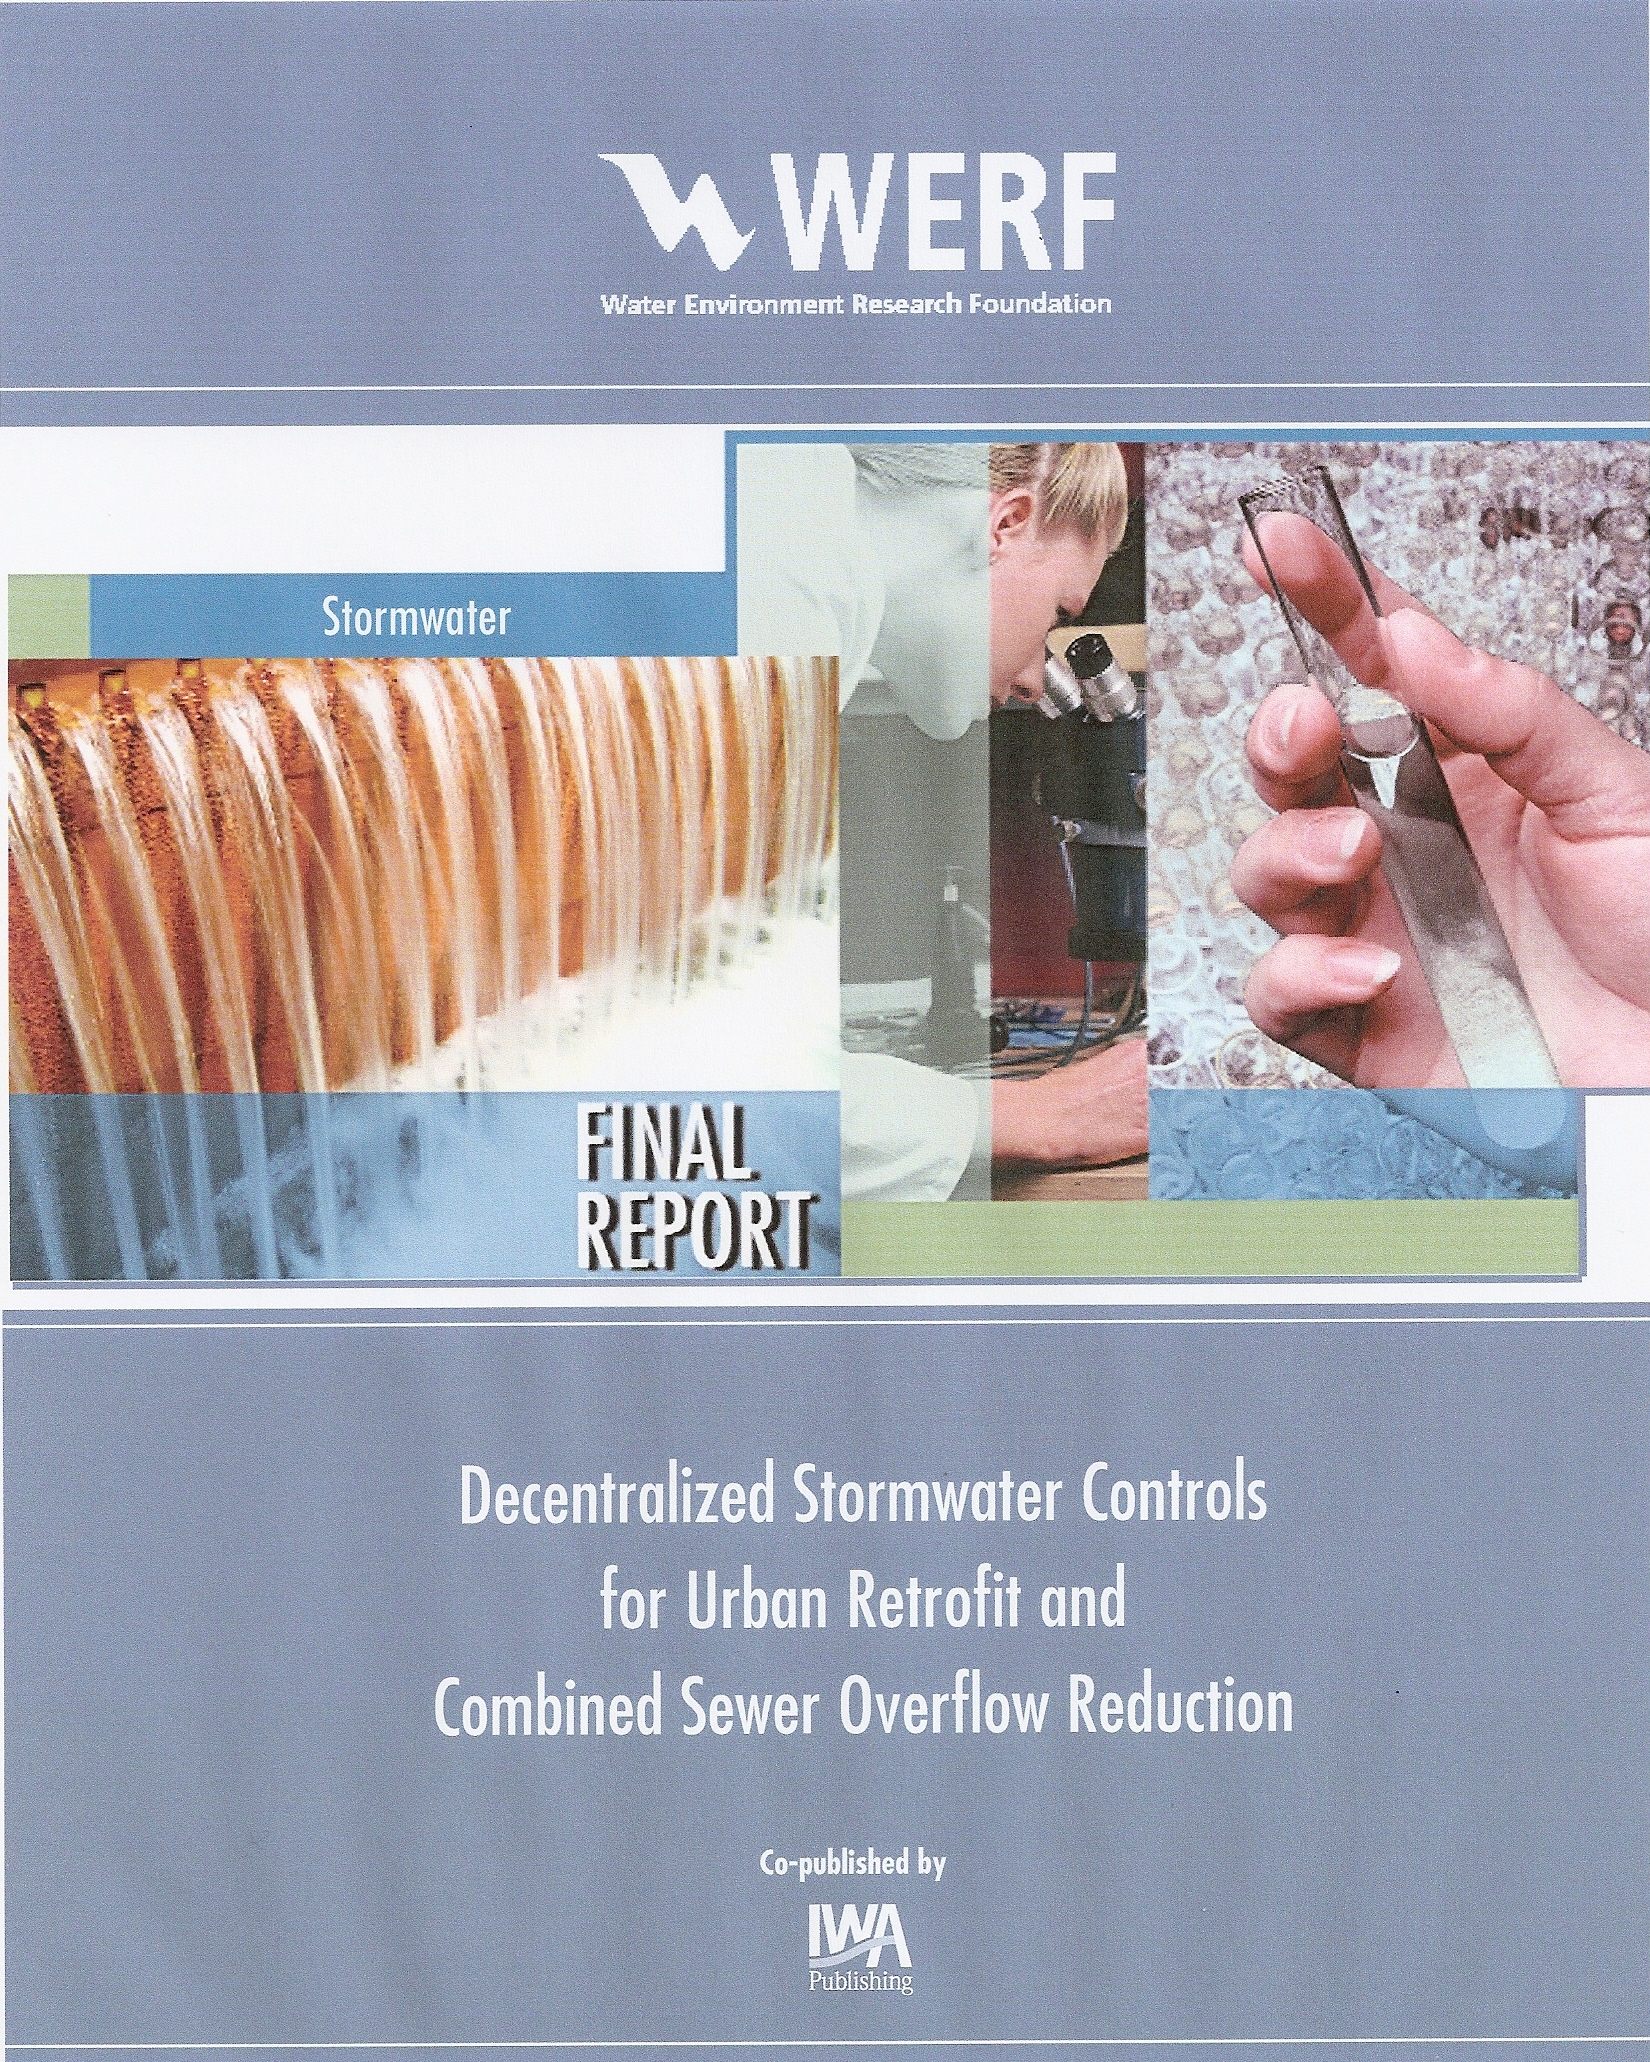 WERF_Decentralized Stormwater Controls_2006_cover